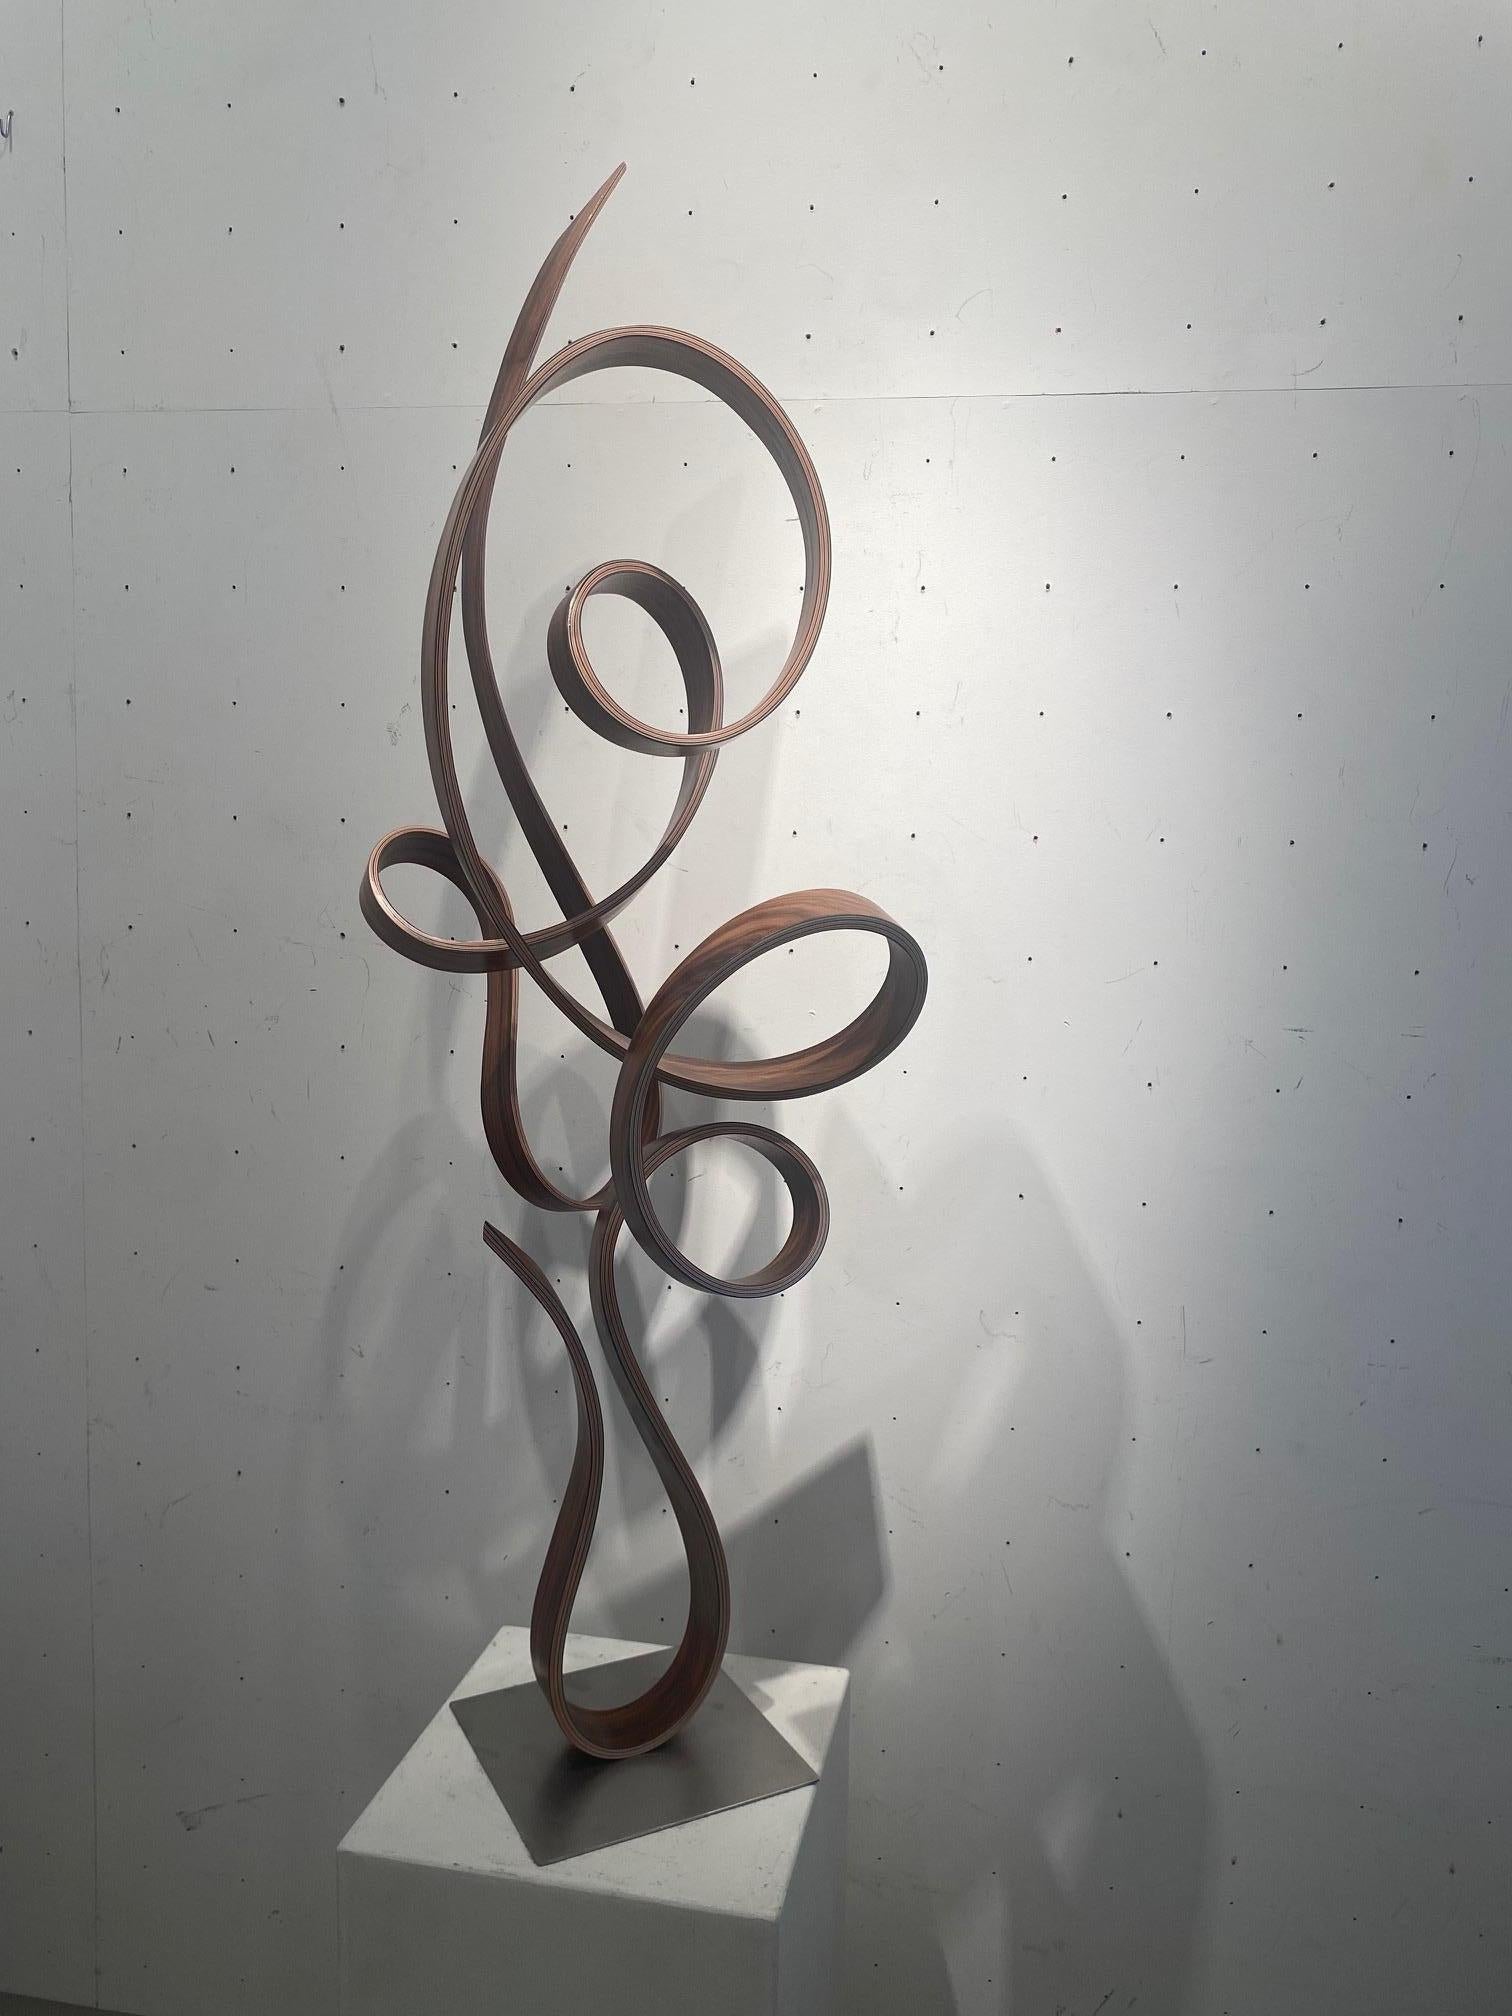 MWT-curvilinear minimalist maple wood sculpture defying gravity by Jacinto Moros